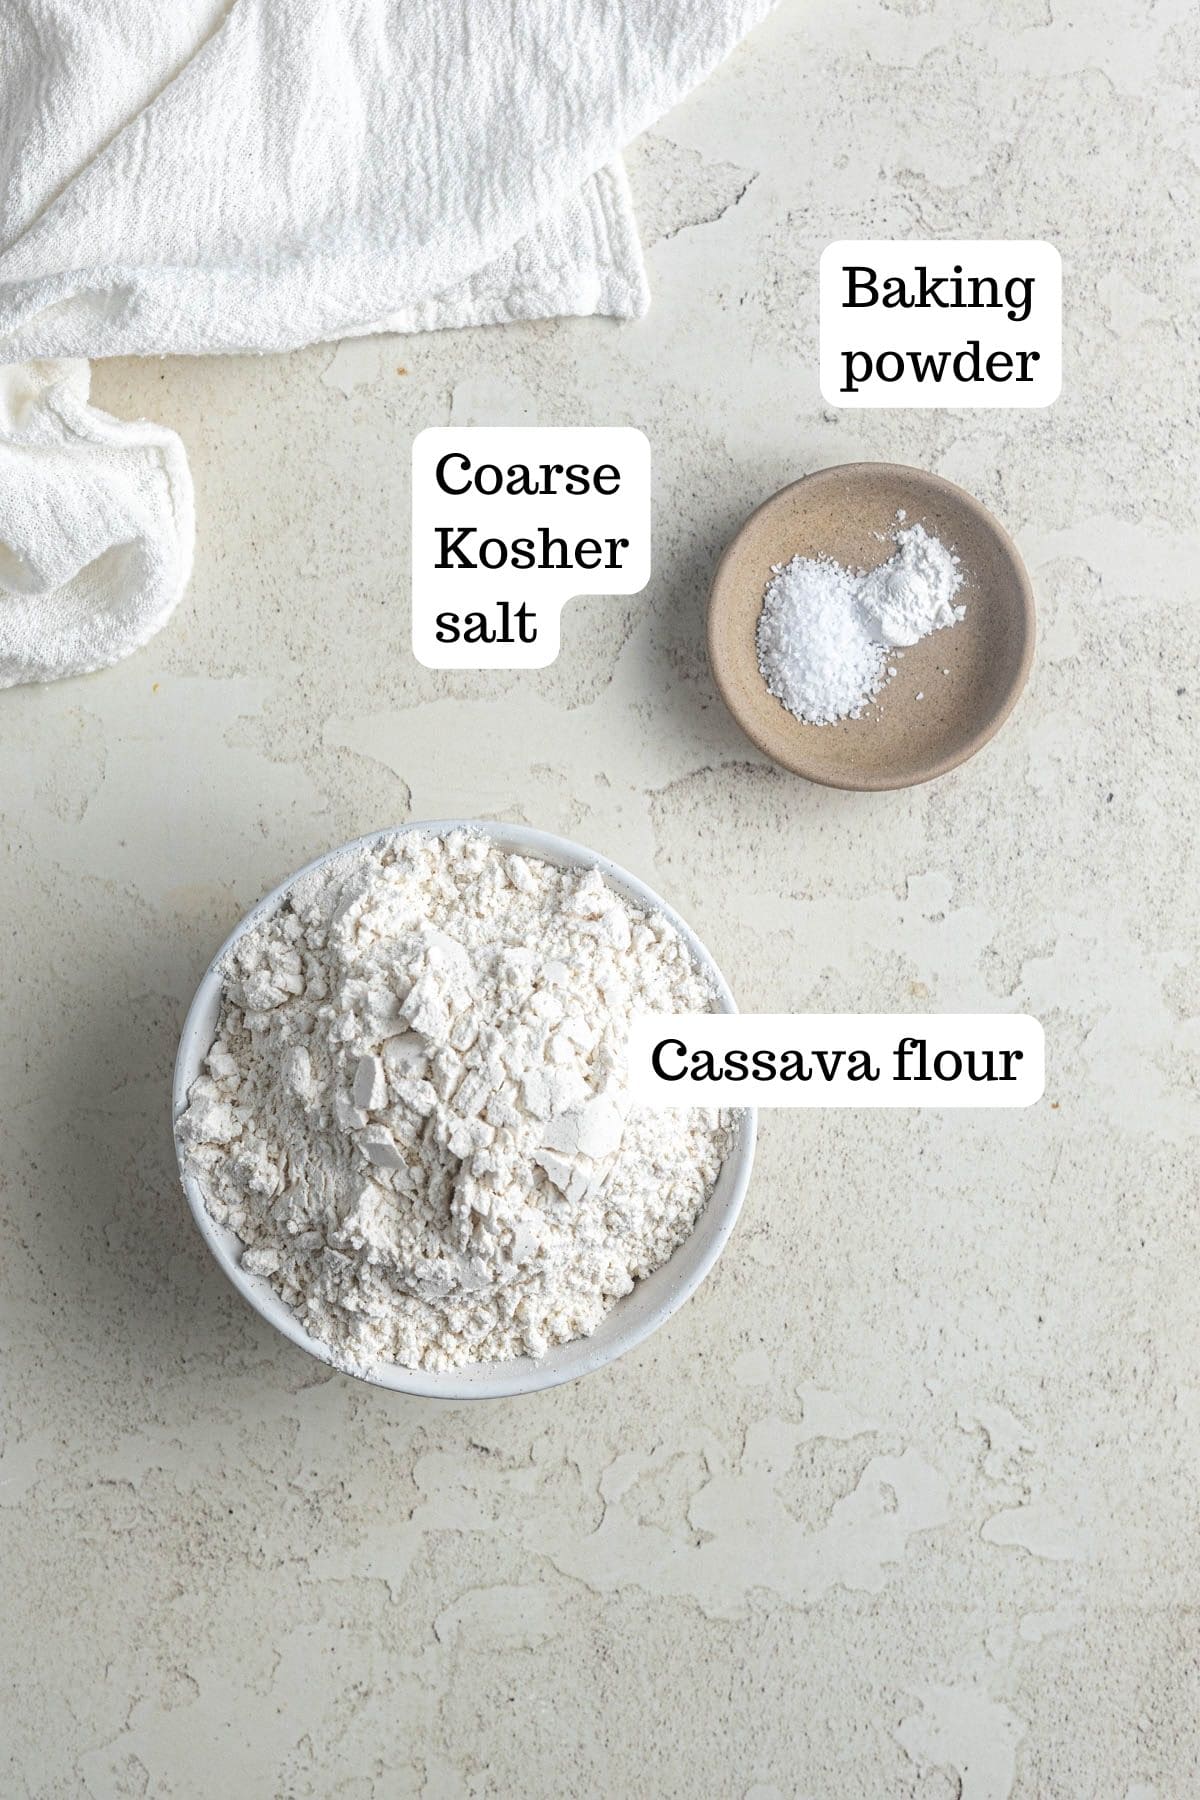 Image showing bowls of dry ingredients for White Chocolate Raspberry Blondies. In the bowls, there is baking powder, salt, and cassava flour.